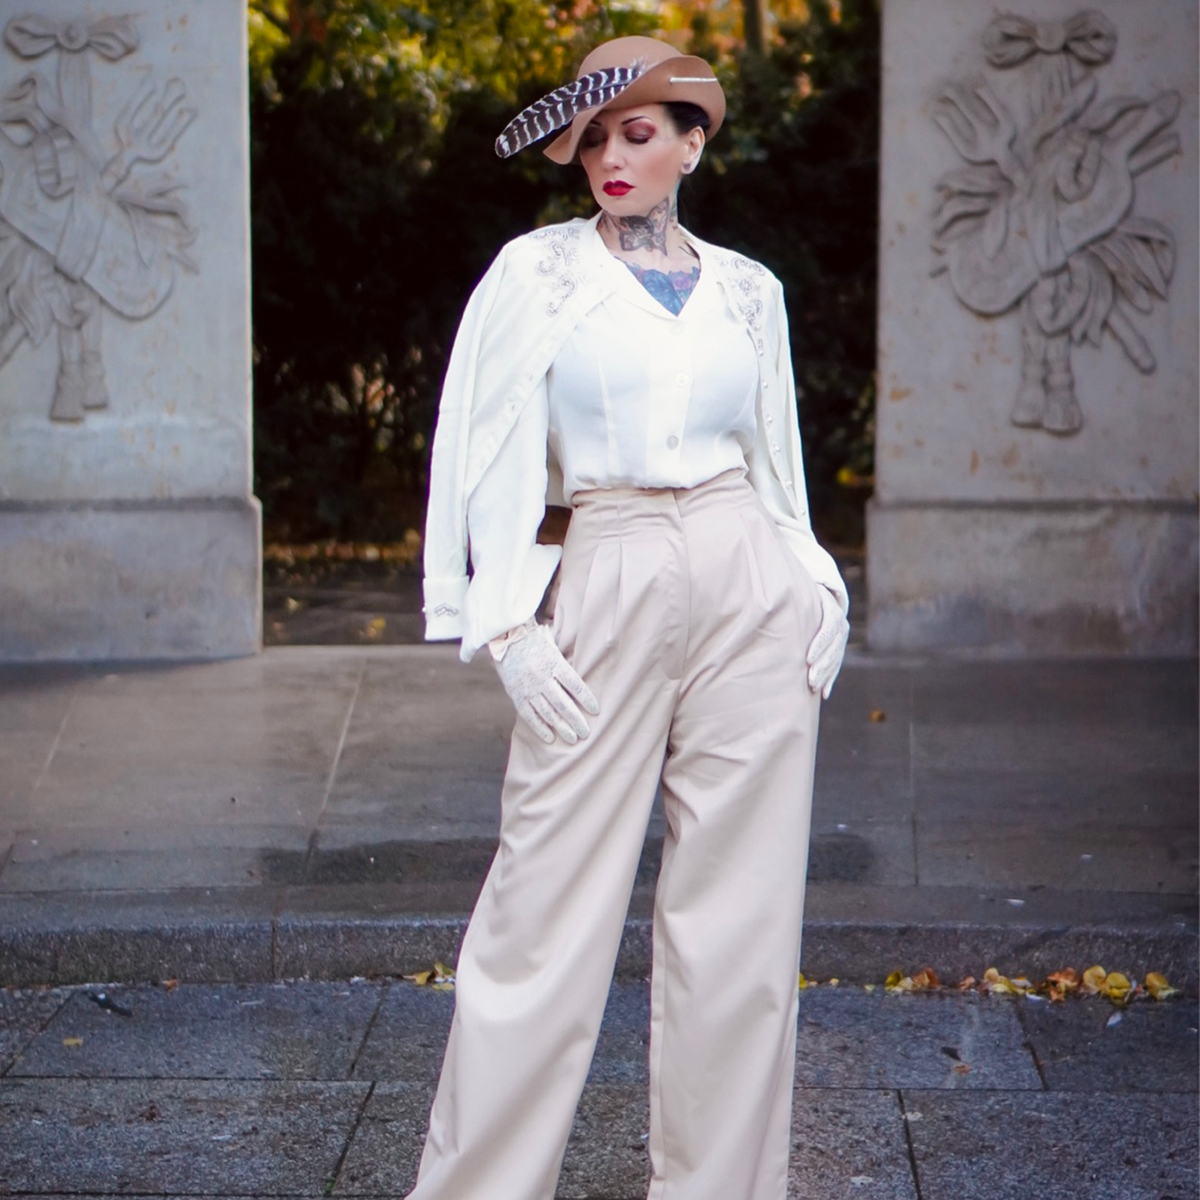 Tailored Audrey Trousers in Green